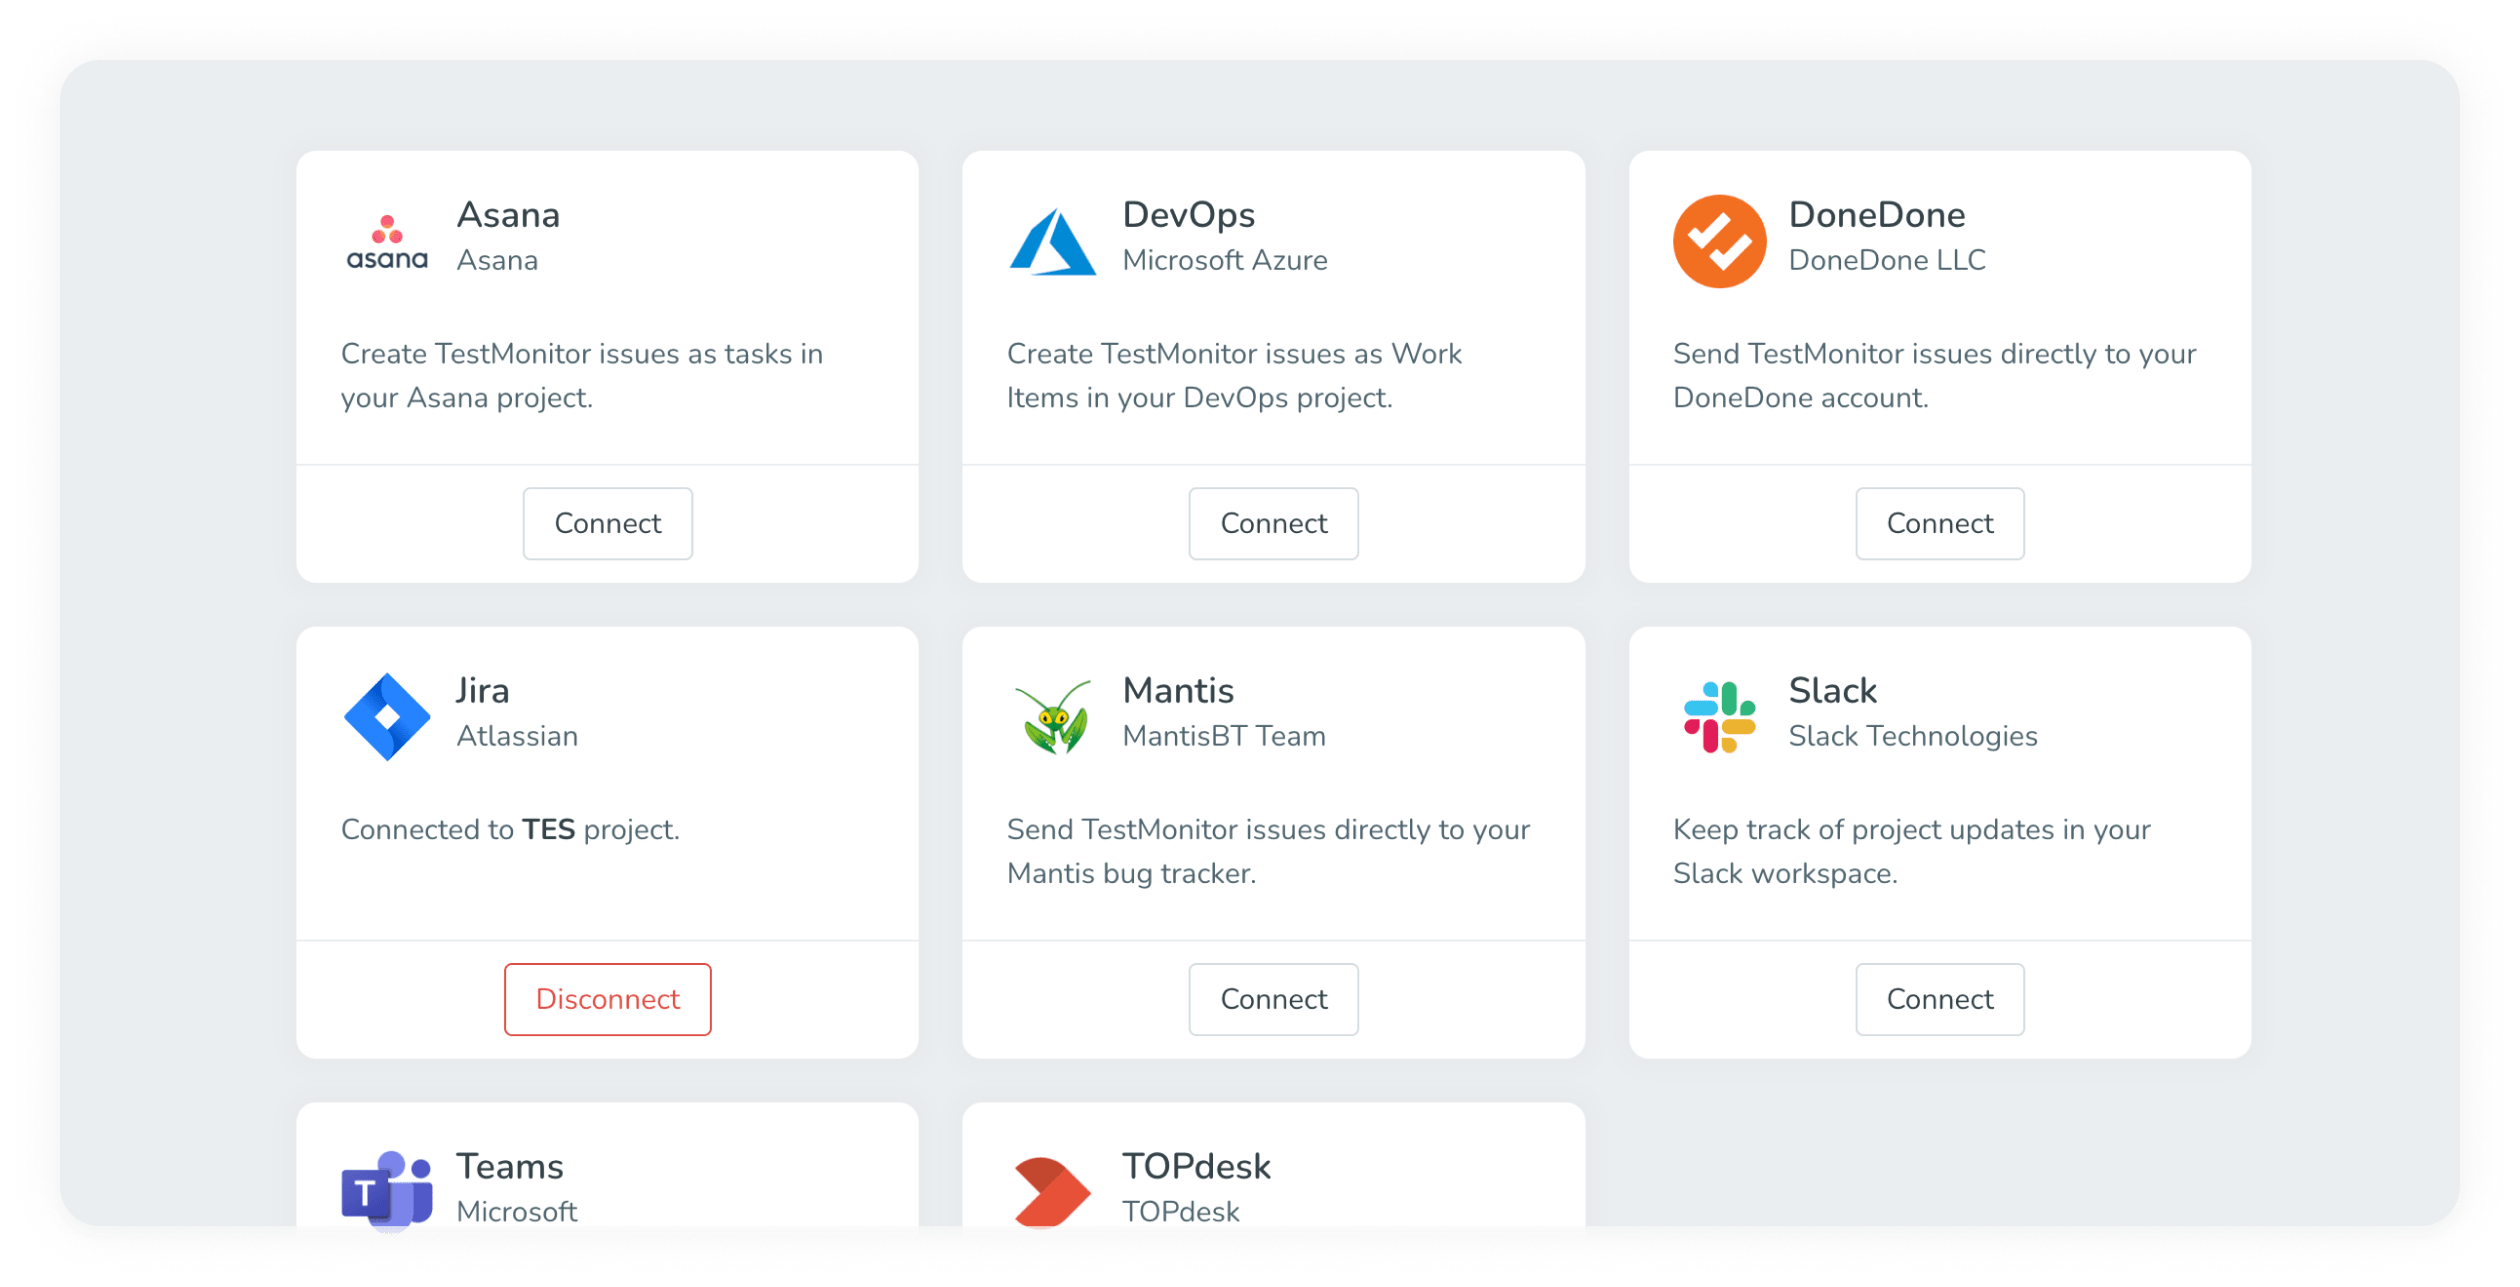 Integrate with Jira, DoneDone, Asana, MantisBT, Azure DevOps, TOPdesk, and thousands more with Zapier